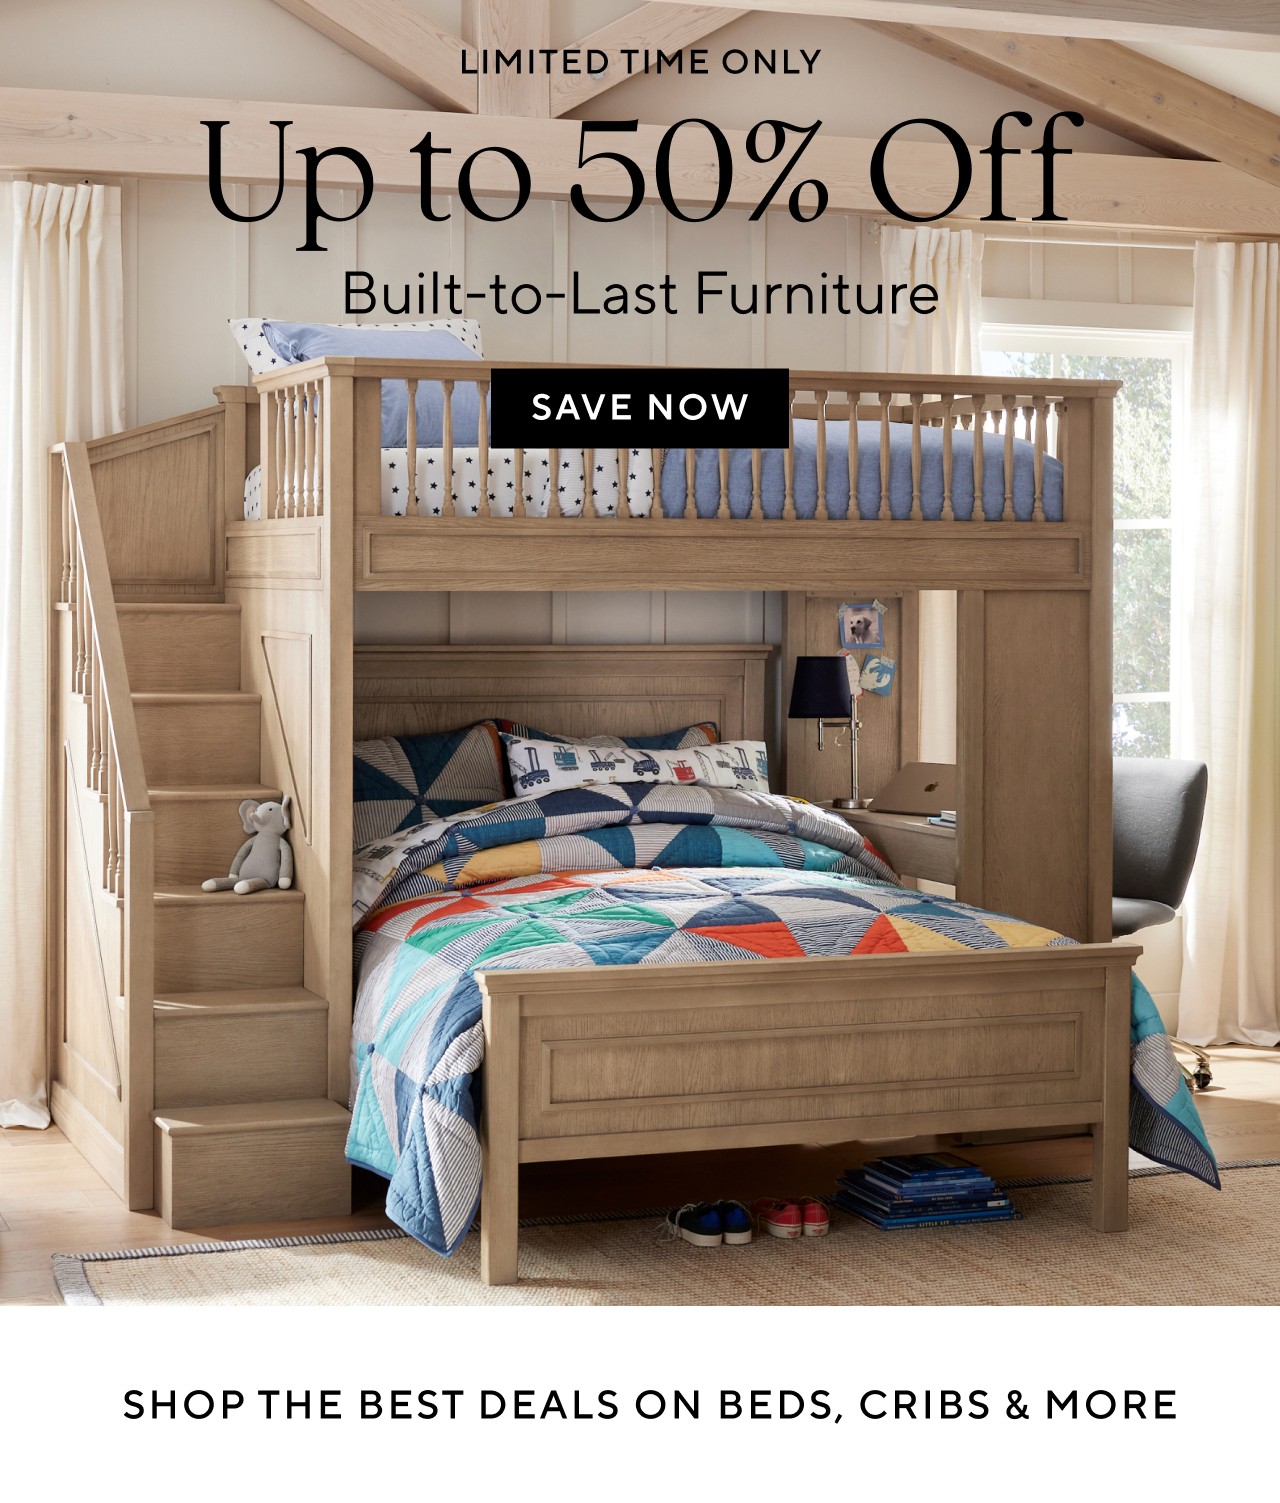 UP TO 50% OFF BUILT-TO-LAST FURNITURE